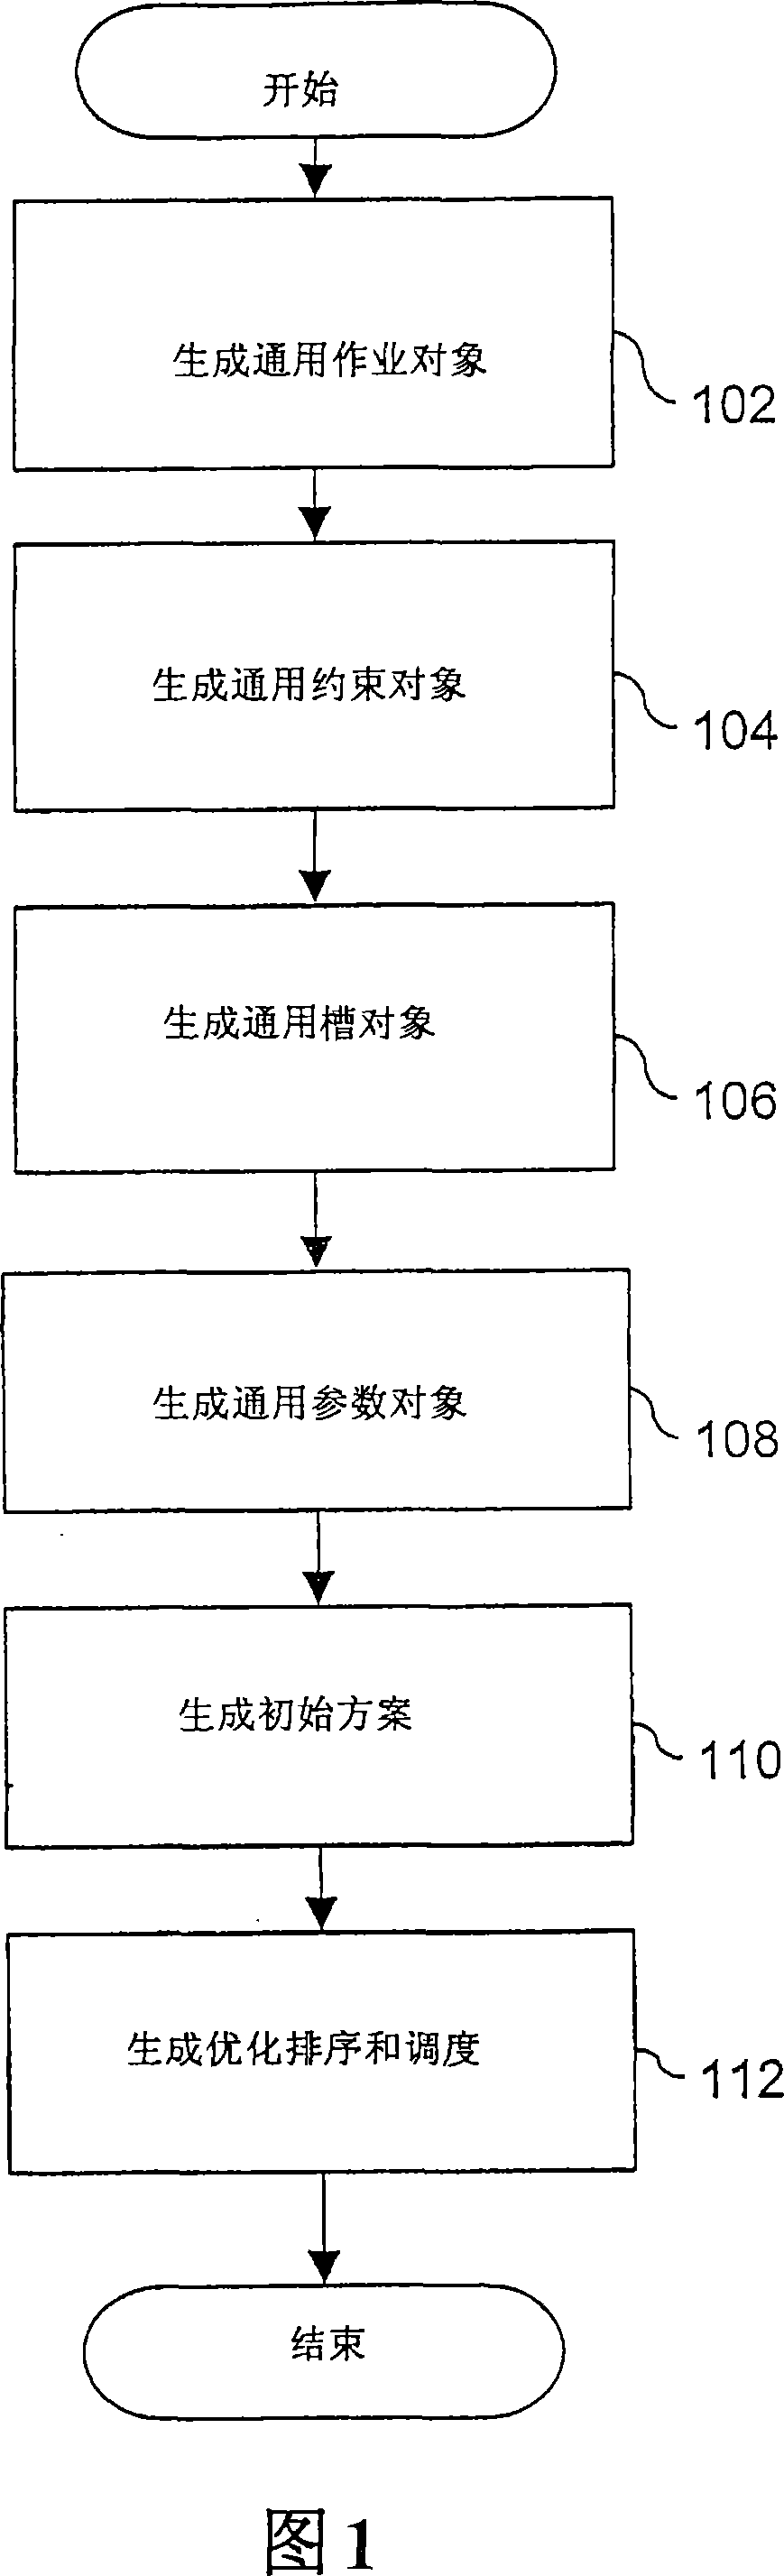 Method and system for sequencing and scheduling